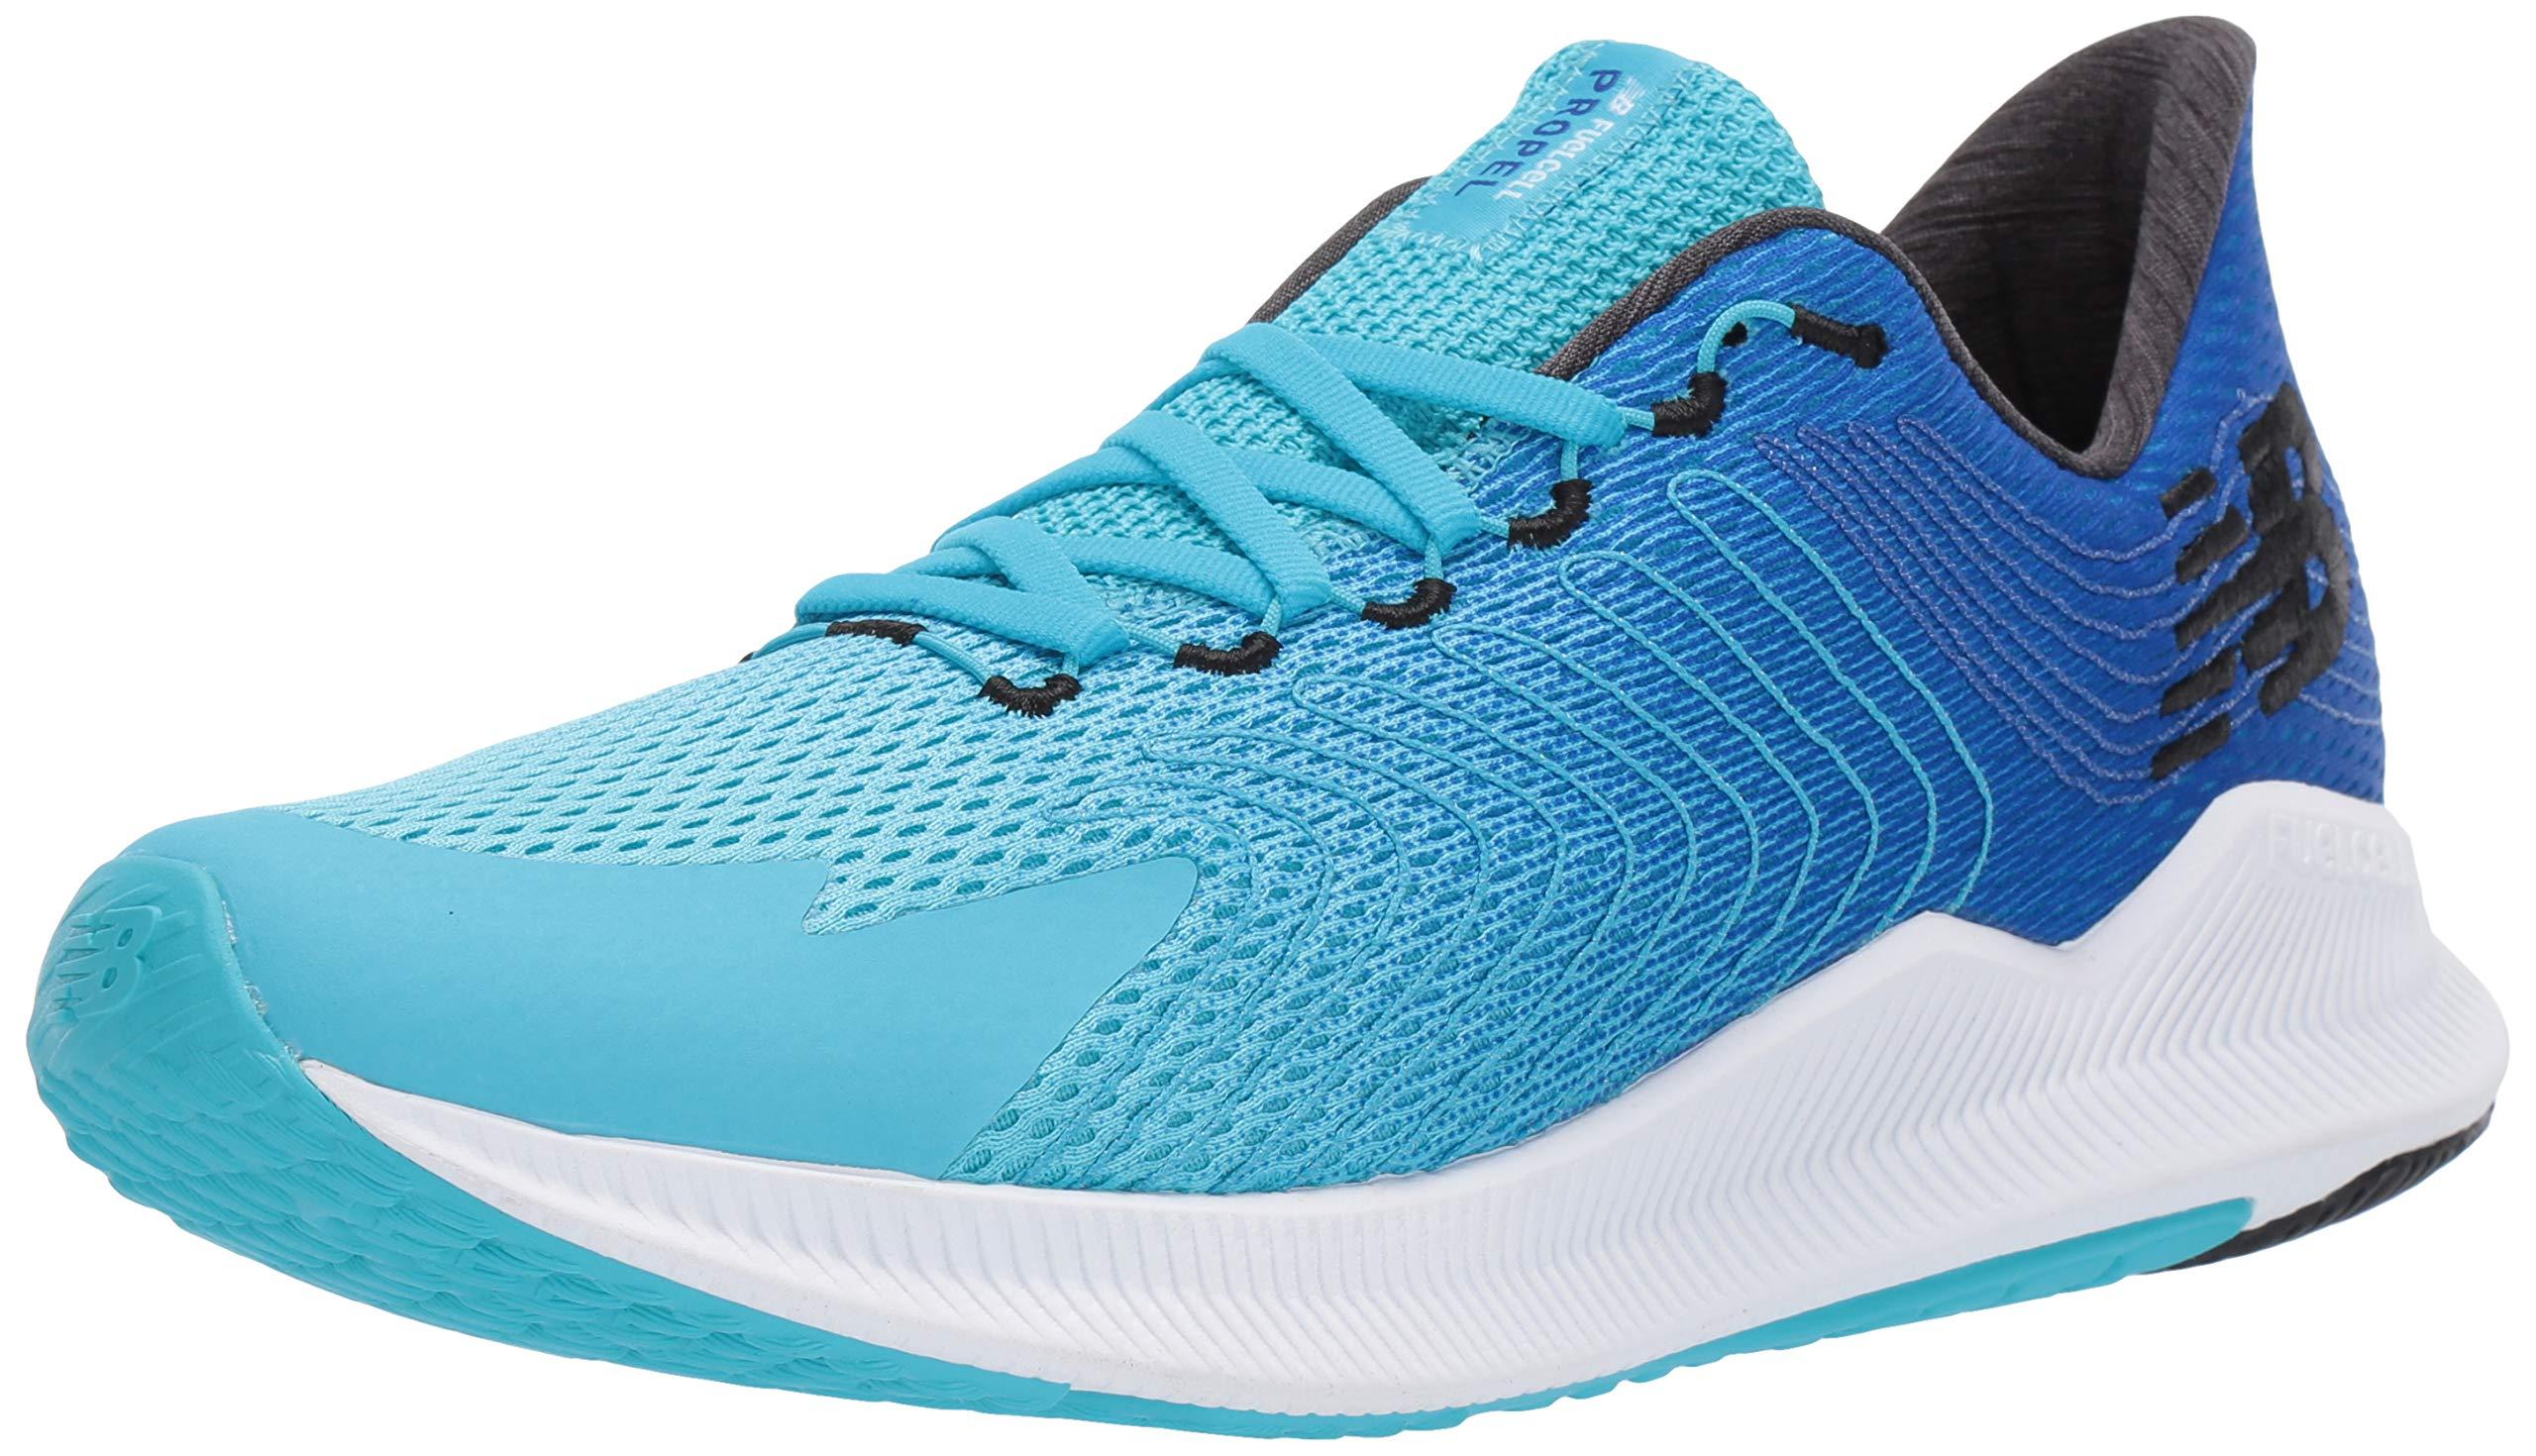 New Balance Fuelcell Propel Running Shoes in Blue for Men - Lyst